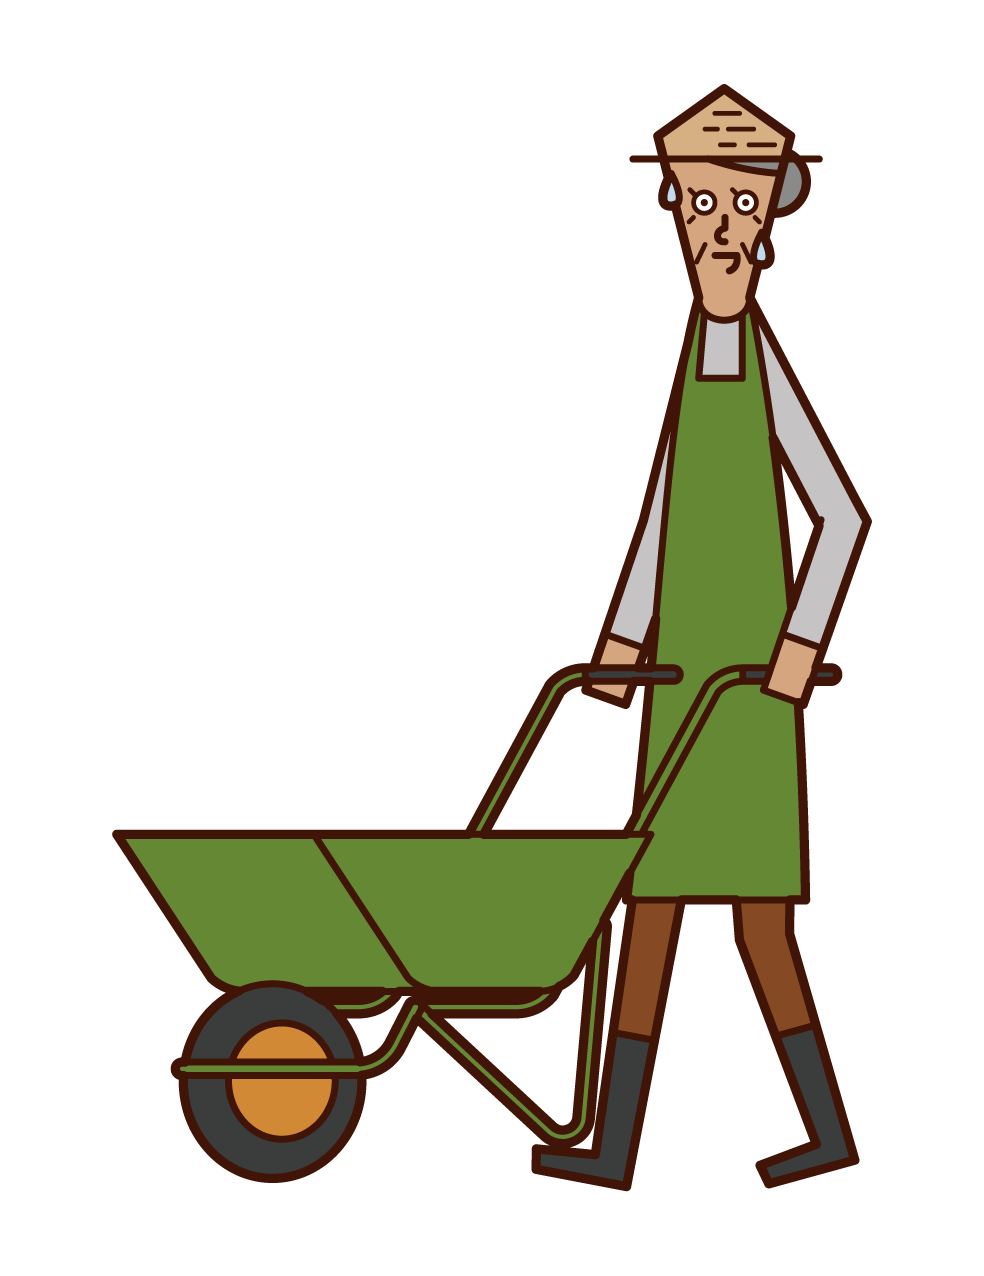 Illustration of an old man (grandmother) using a wheeled unicycle